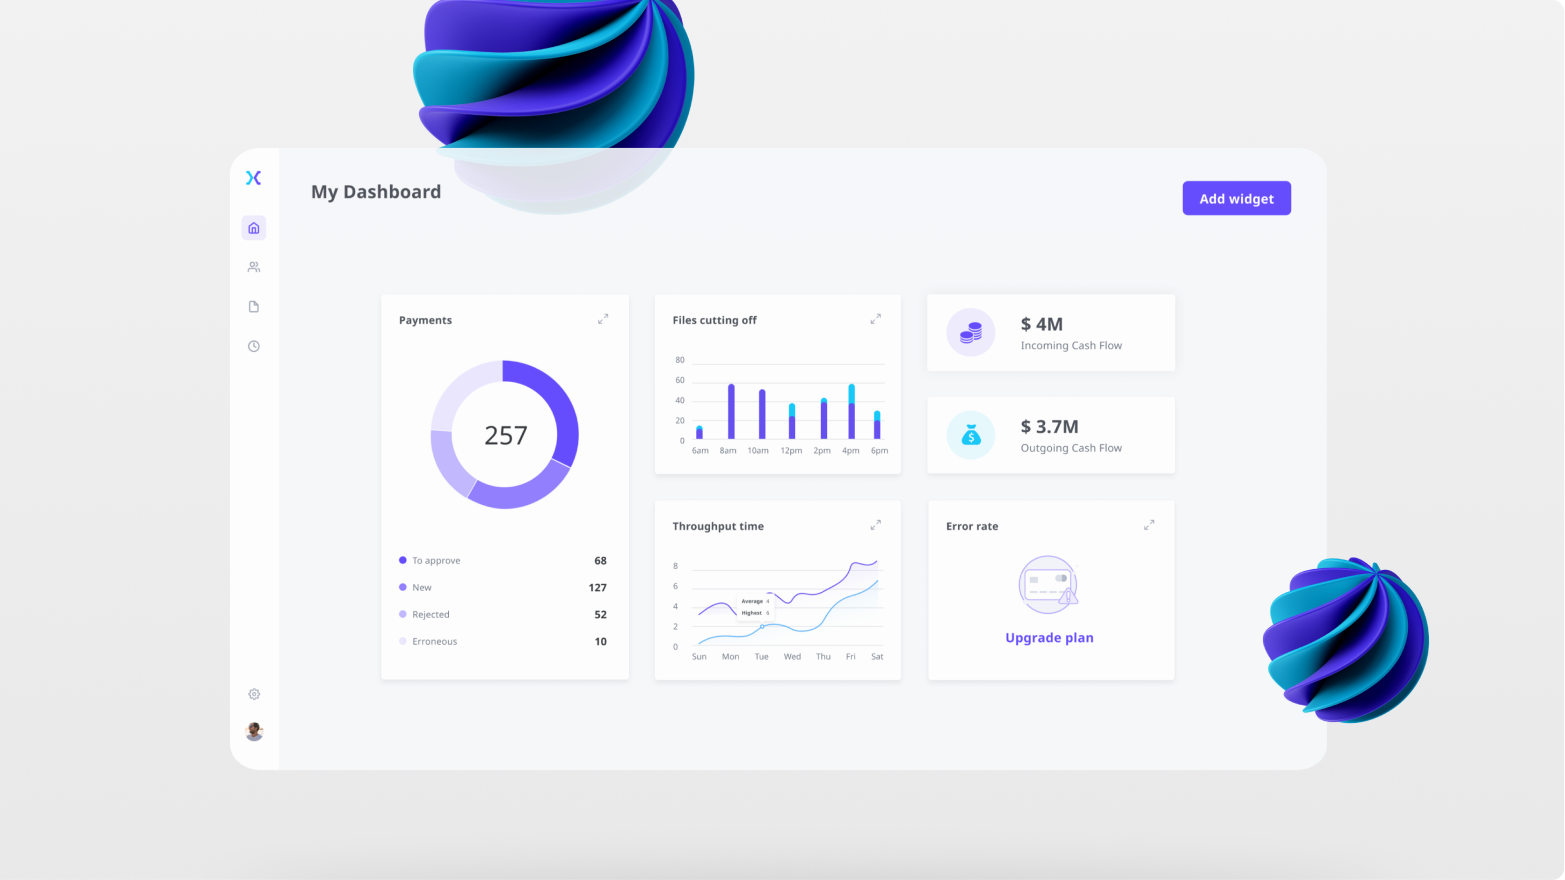 Dashboard interface design in light white and purple theme.